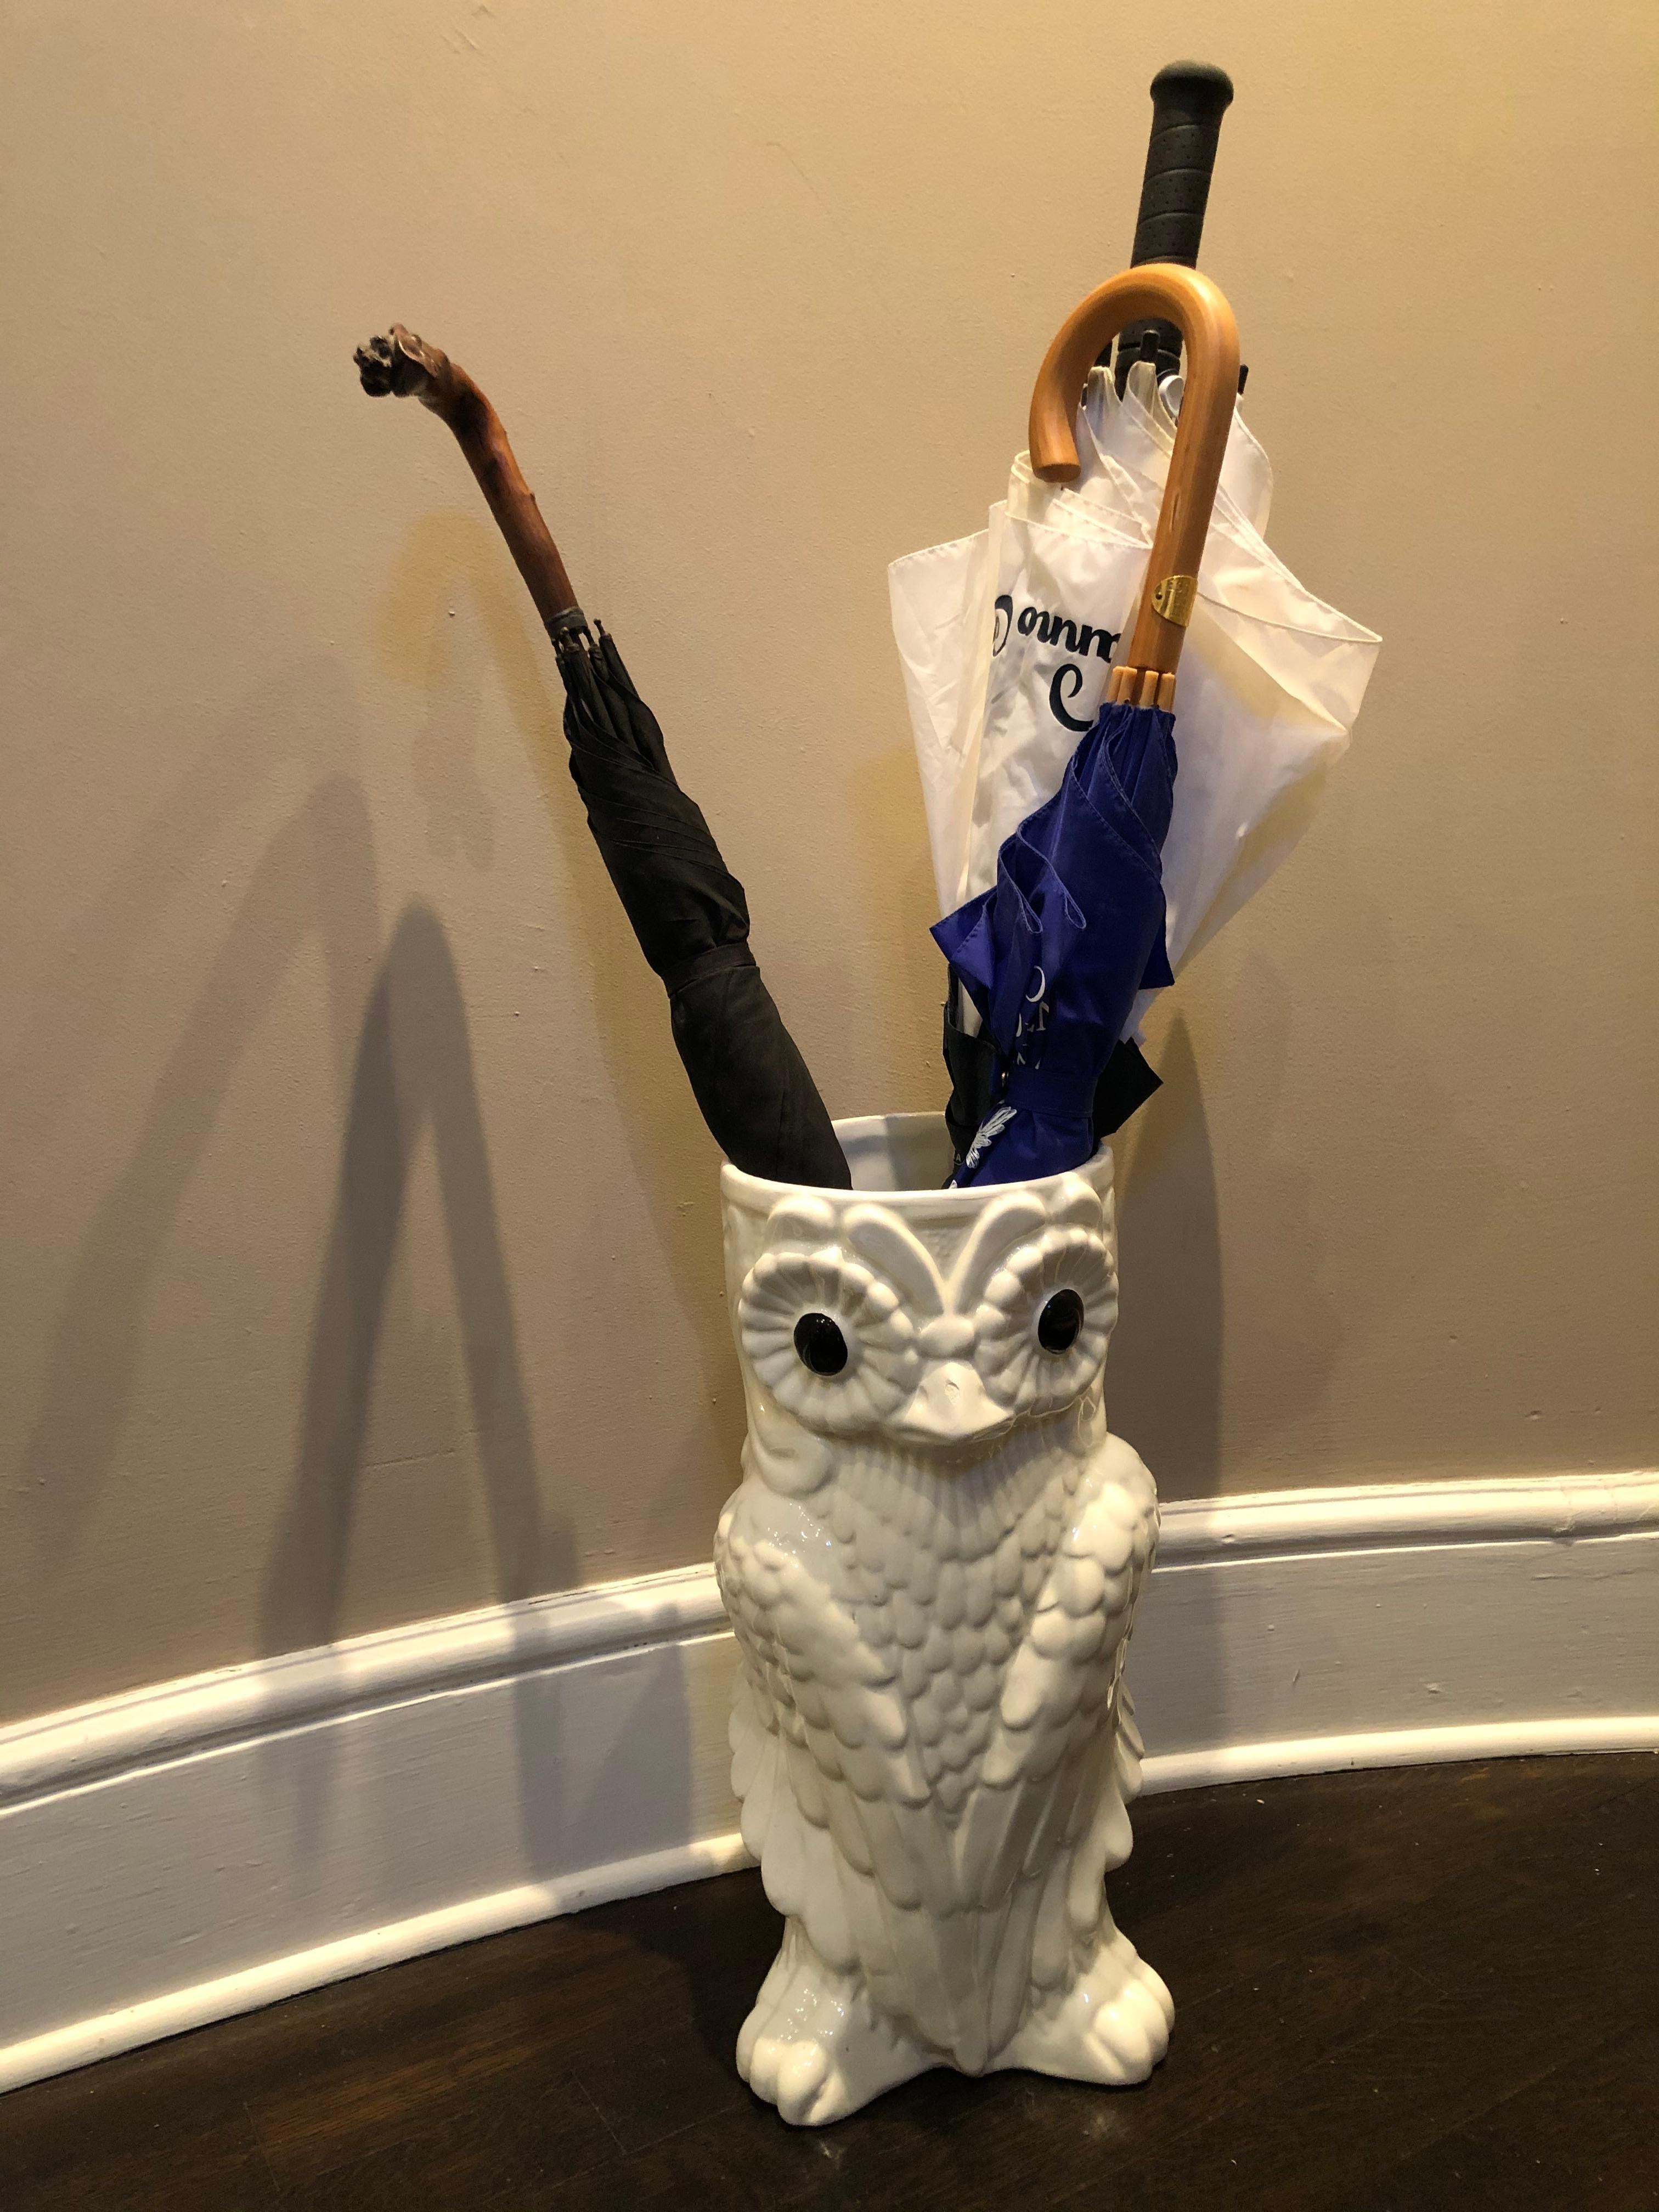 A whimsical adorable white ceramic owl that makes a wonderful functional umbrella or cane stand. 
Would also be a great centerpiece to hold branches. Stamped Spain on the bottom.